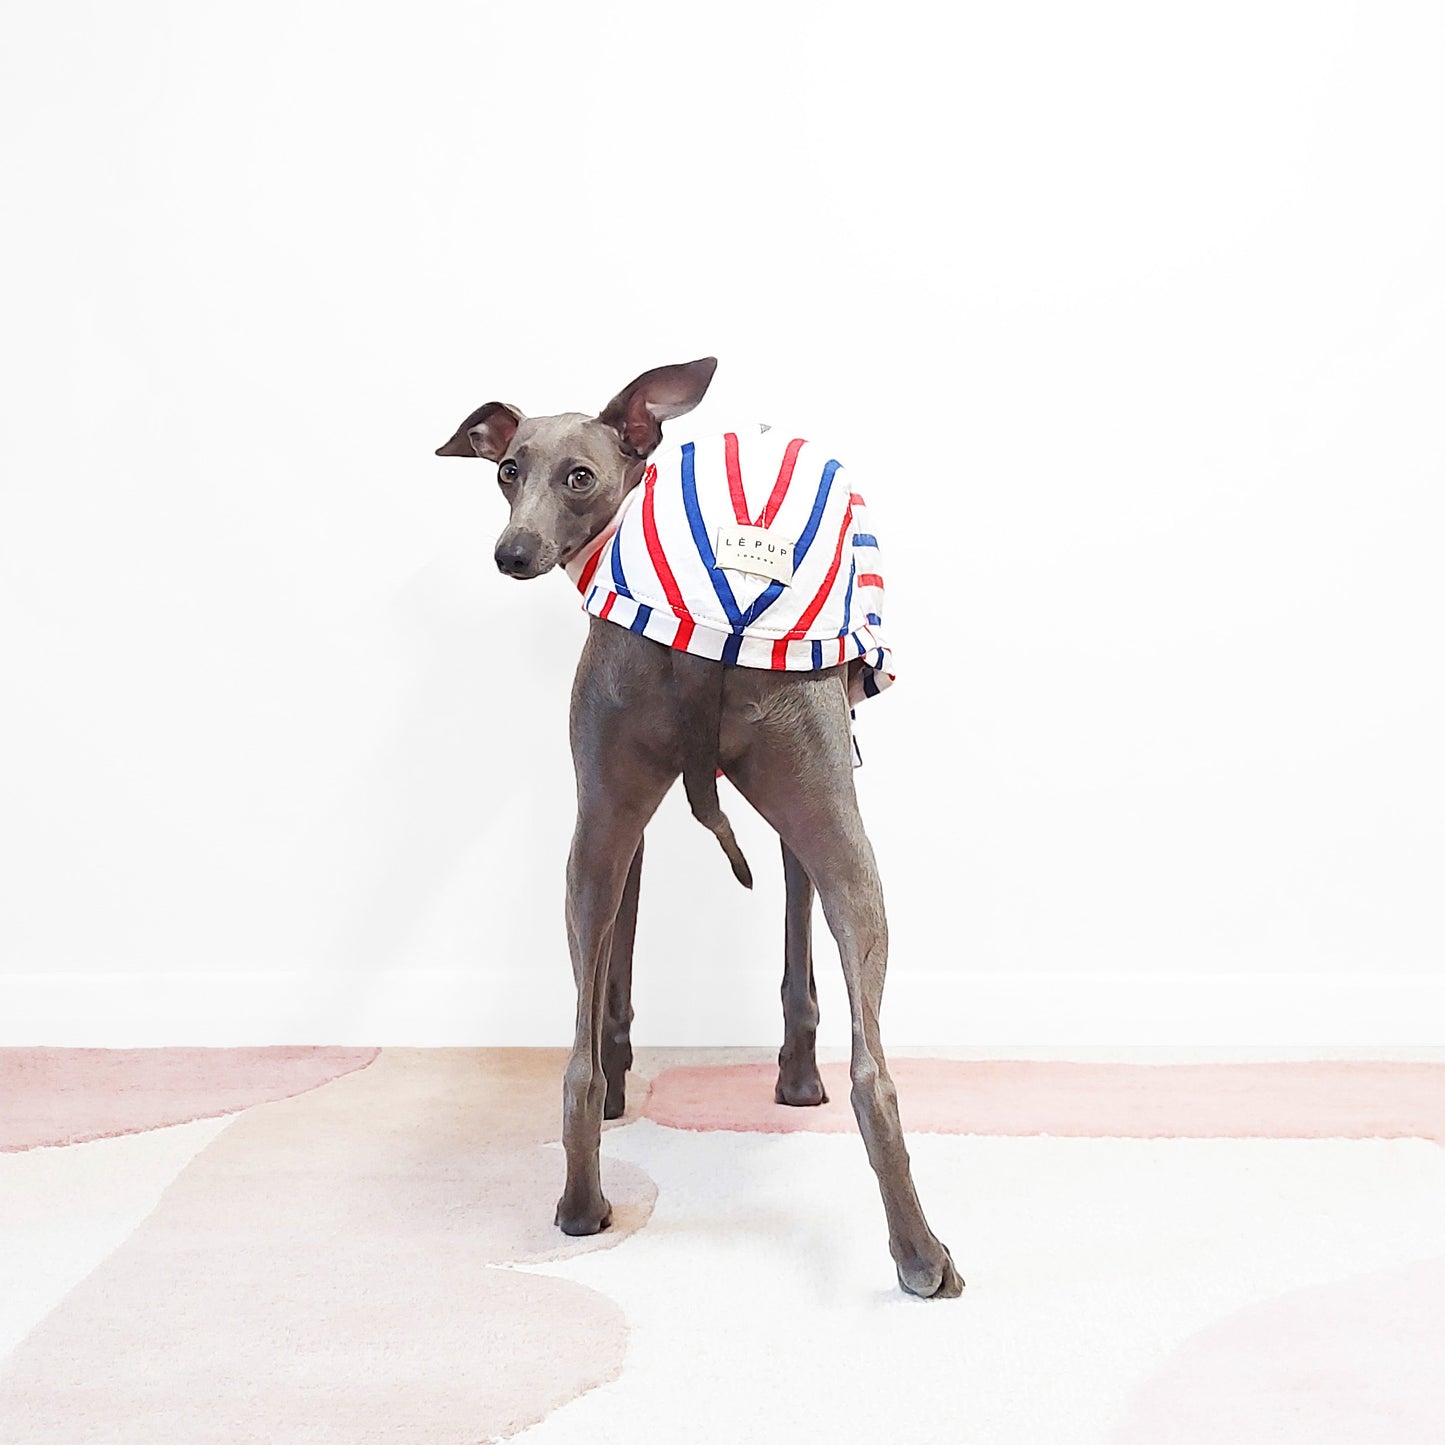 Italian Greyhound wearing Le Pup's blue and red stripe dog jumper